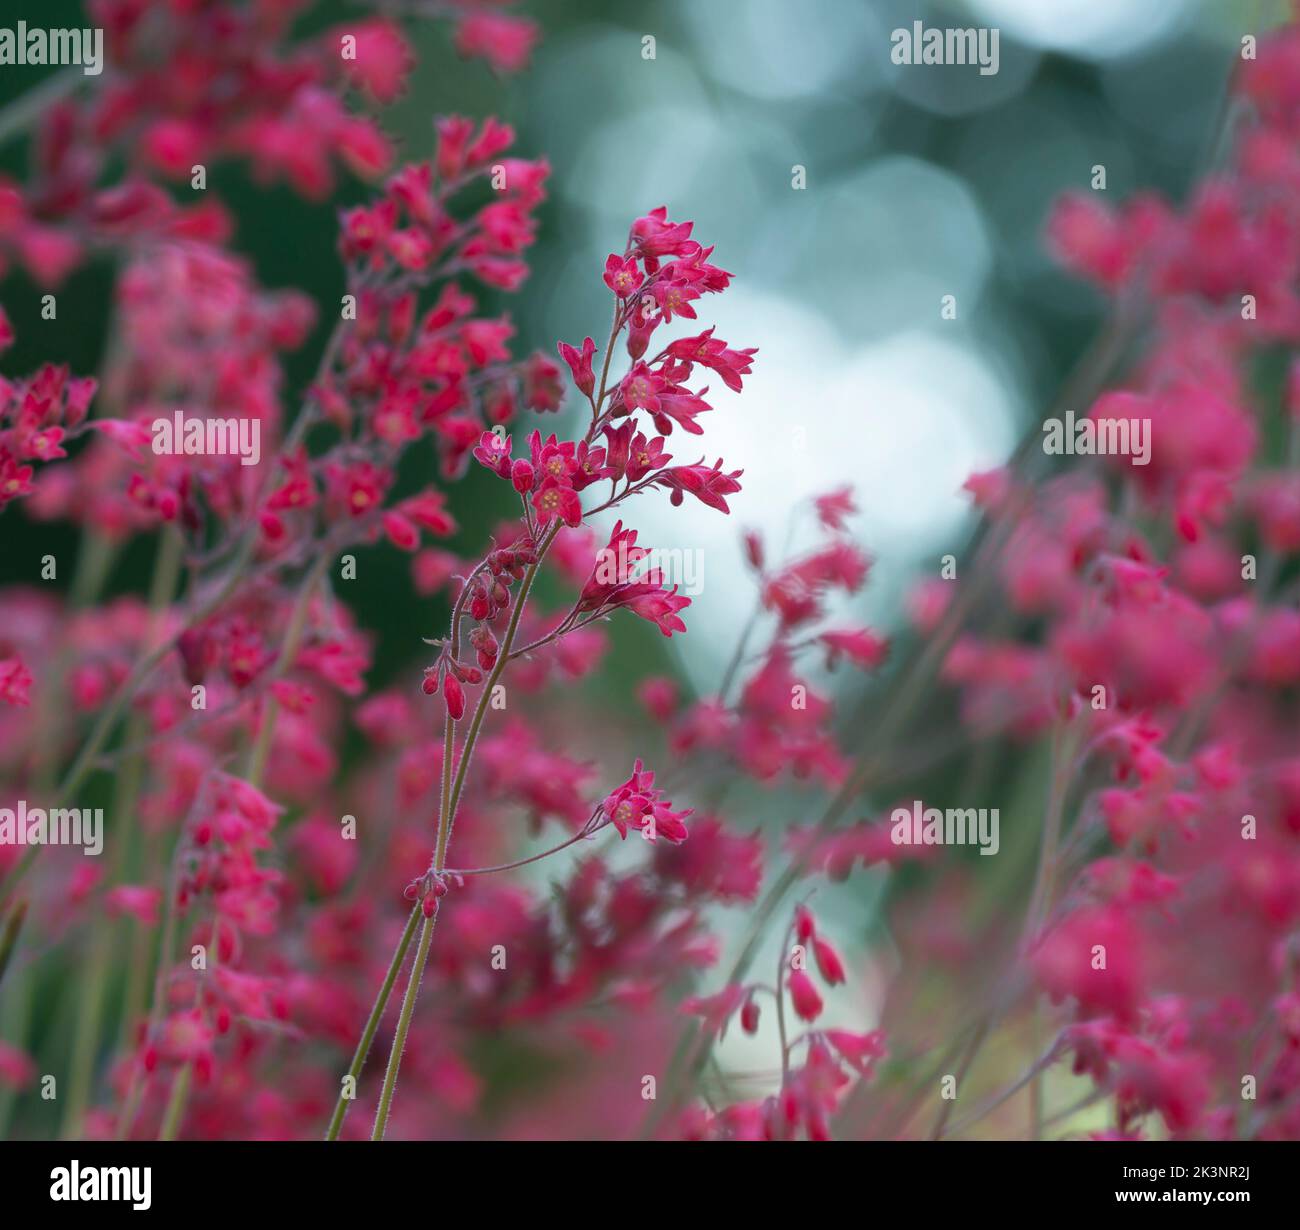 Coral bells, Heuchera sanguinea blossoming, reflections in the background Stock Photo